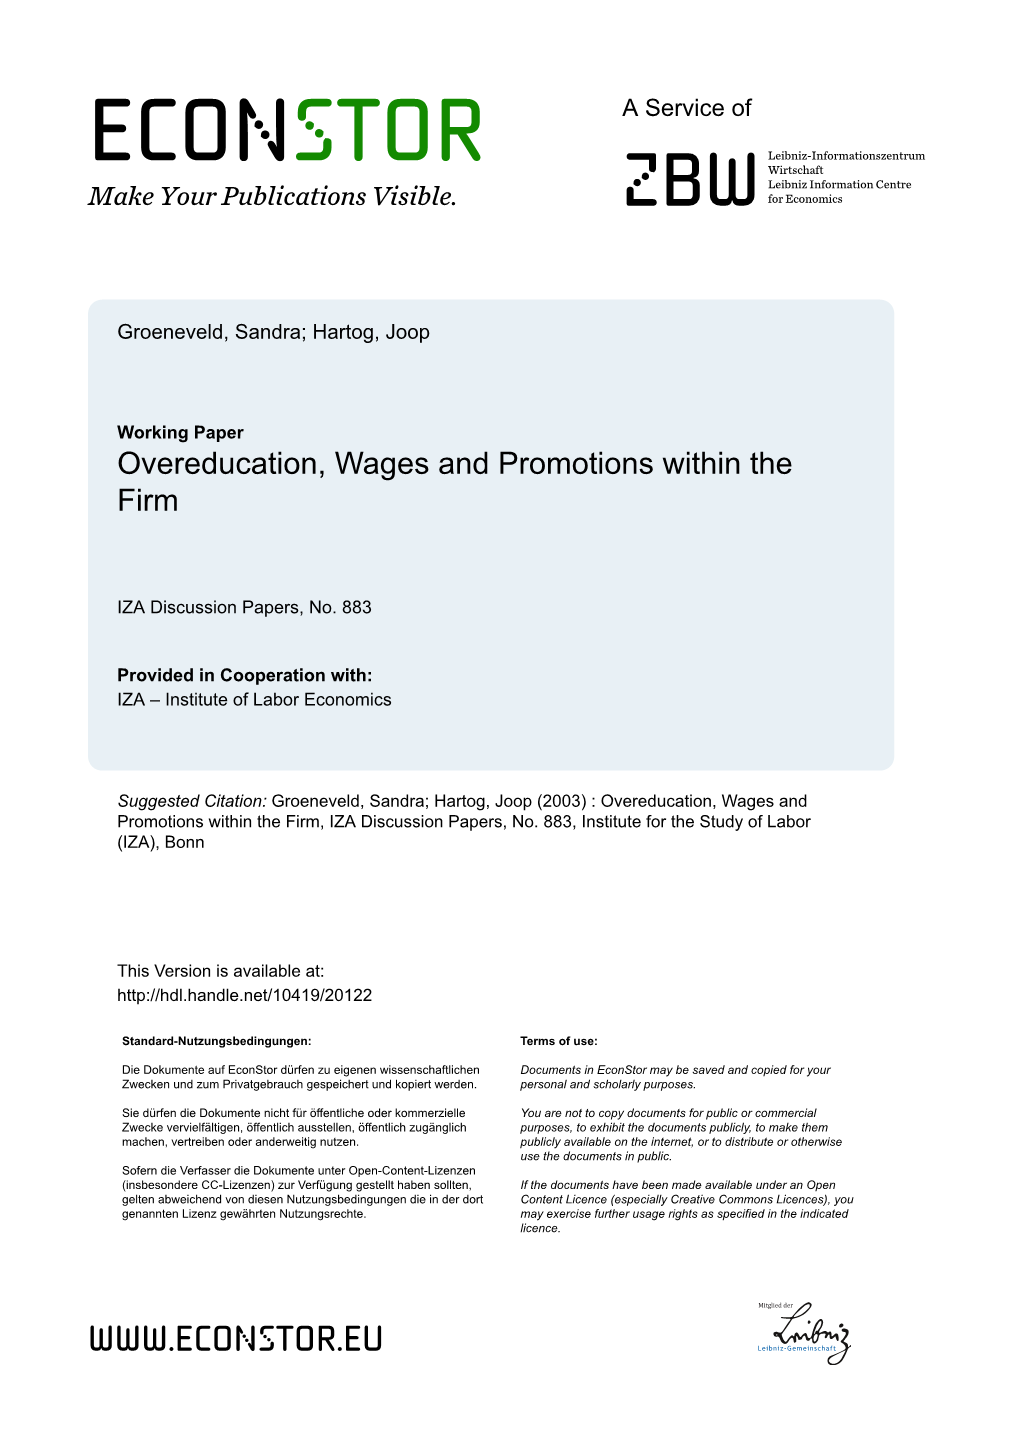 Overeducation, Wages and Promotions Within the Firm